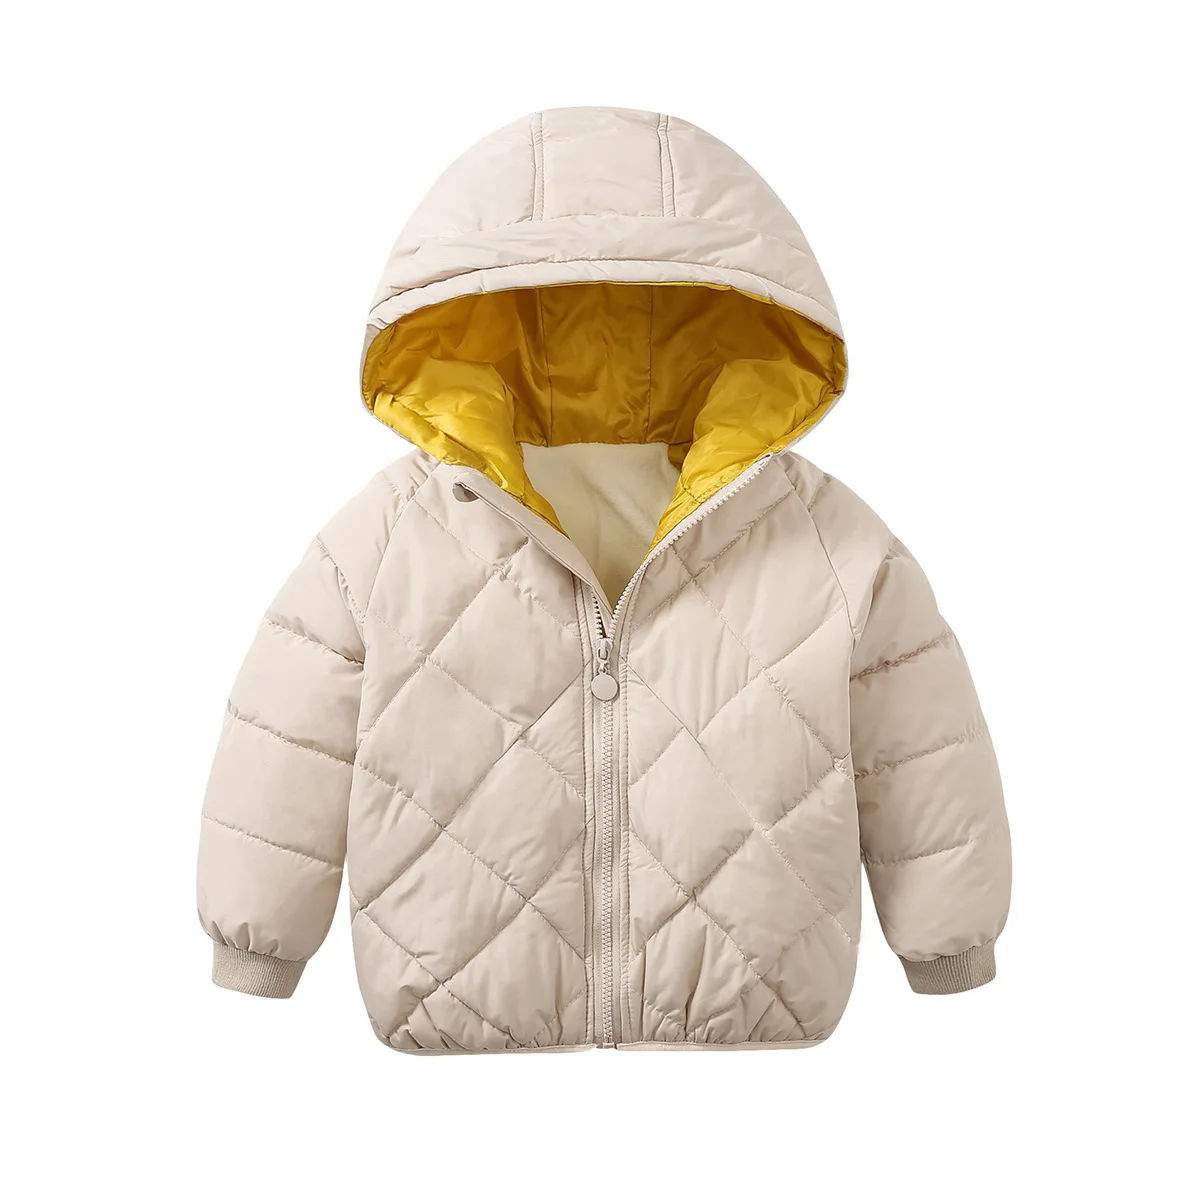 

Kid Girl Clothes Jacket Winter Thicken Warm Cotton-padded Baby Boy Coat Hooded Infant Outerwear Costume Toddler Children A771